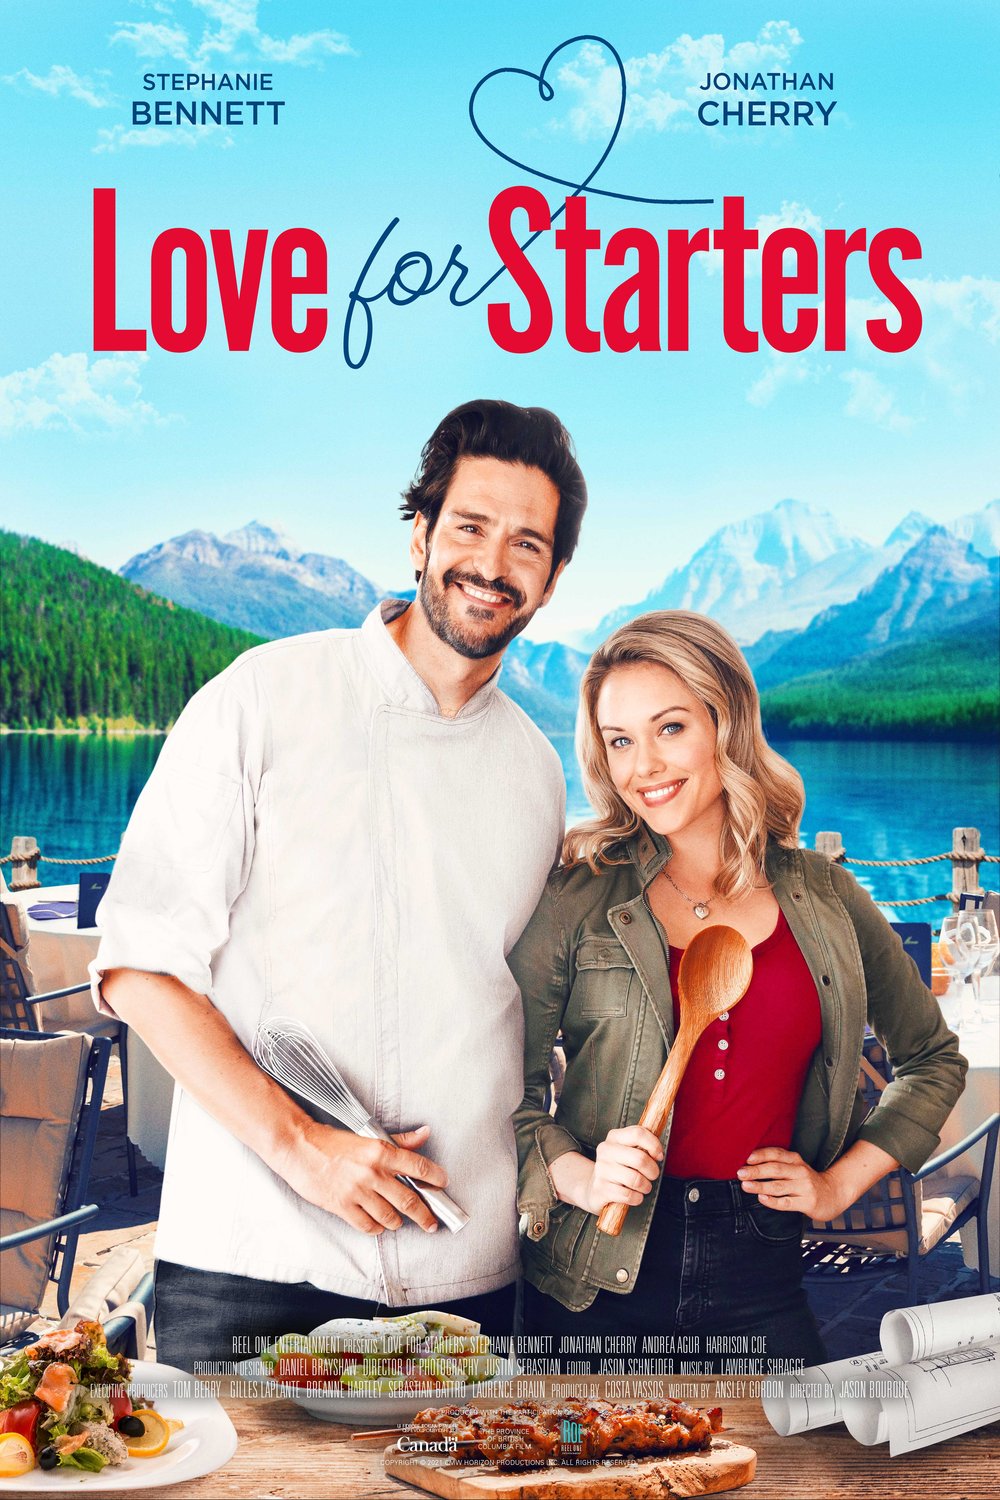 Poster of the movie Love for Starters